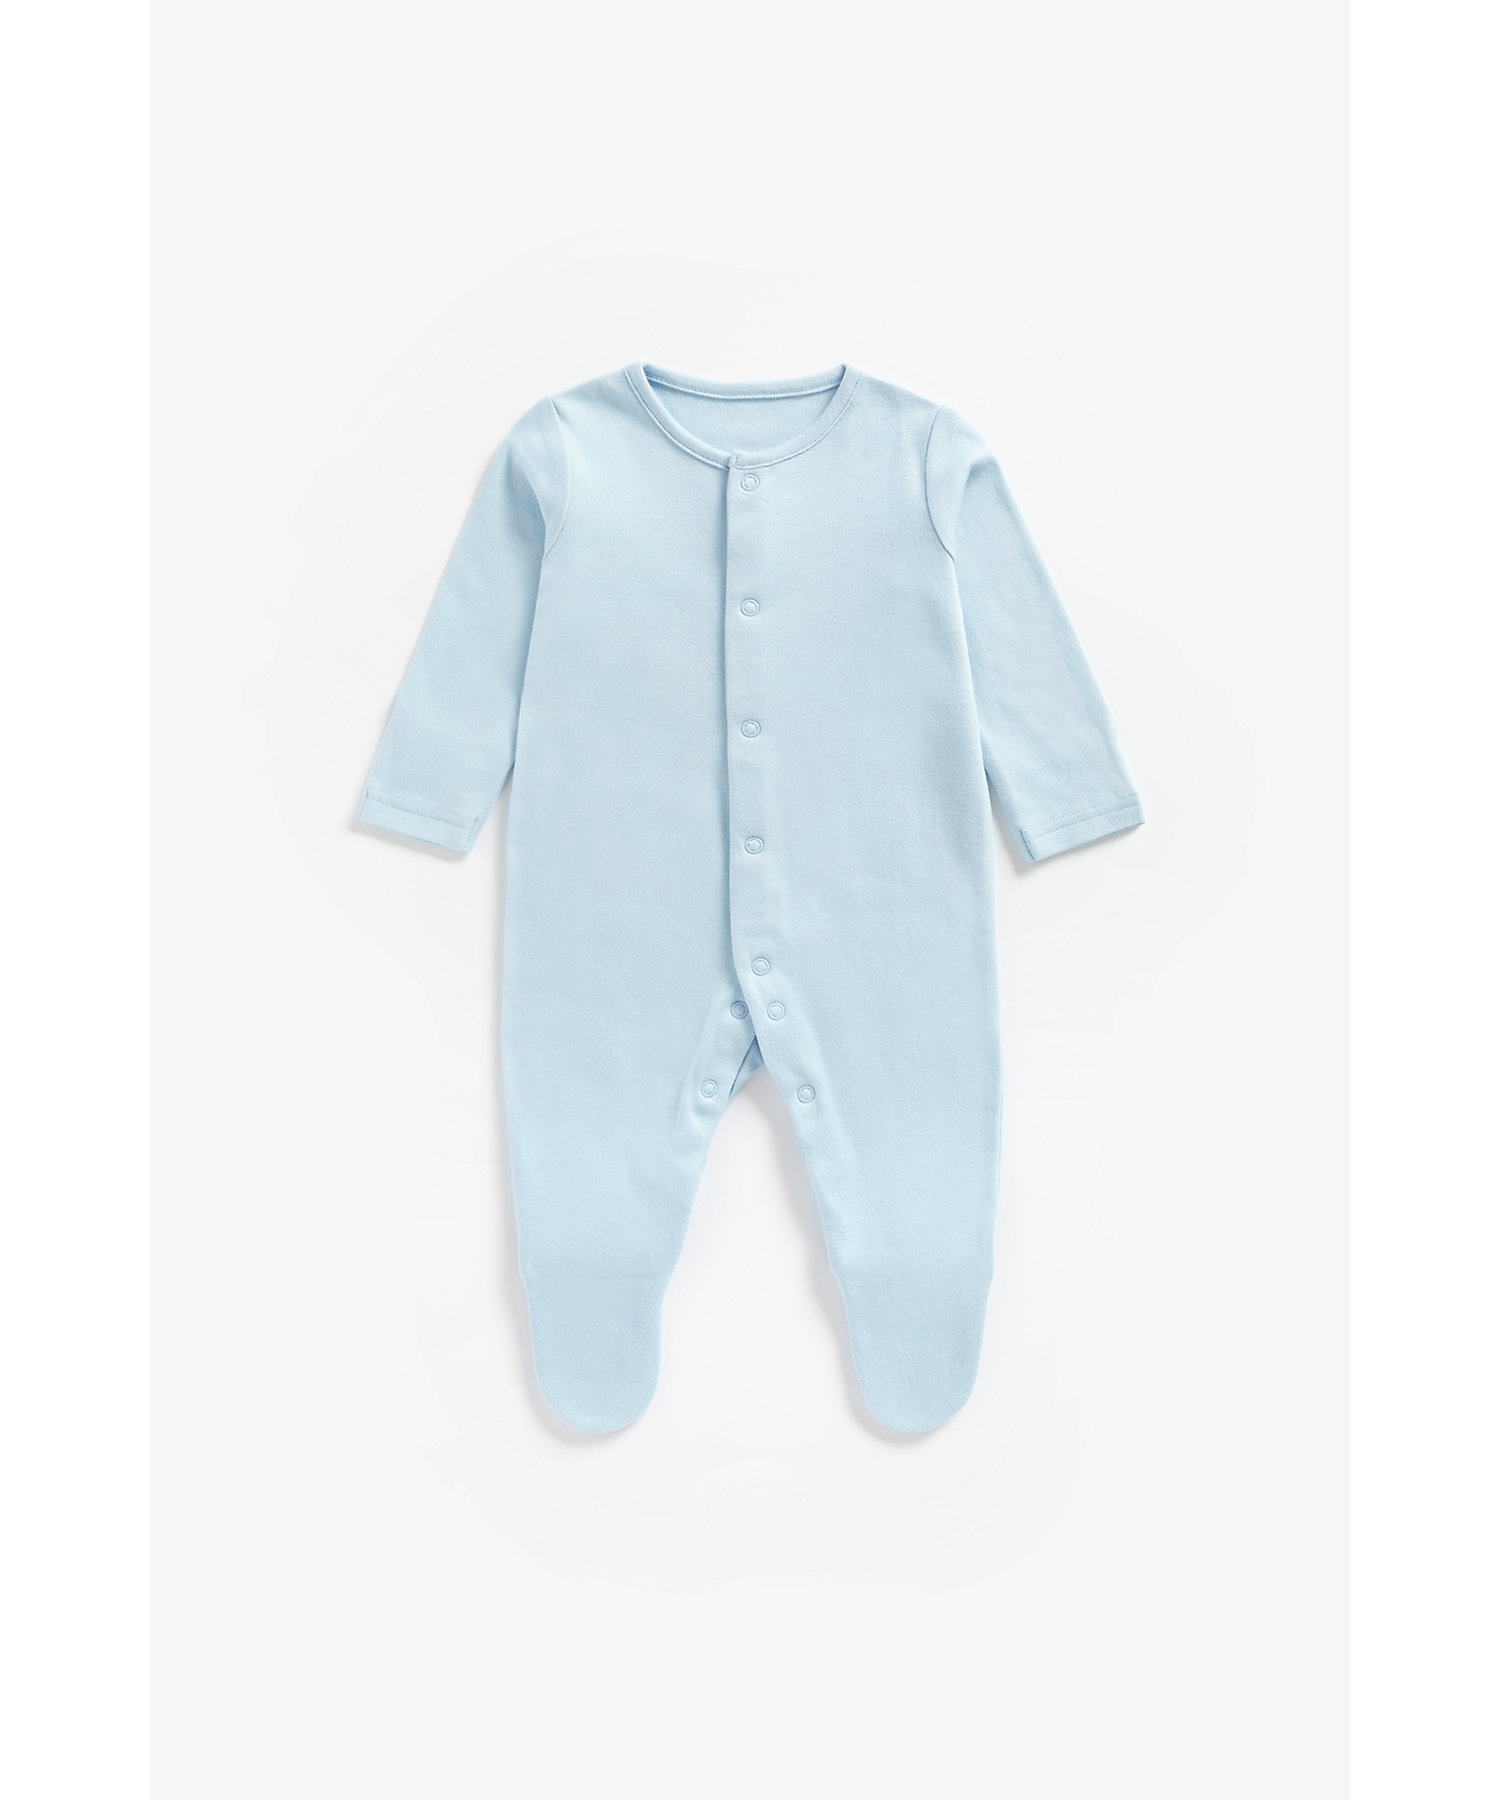 Mothercare | Boys Full Sleeves Sleepsuit Striped And Printed - Pack Of 3 - Blue 3